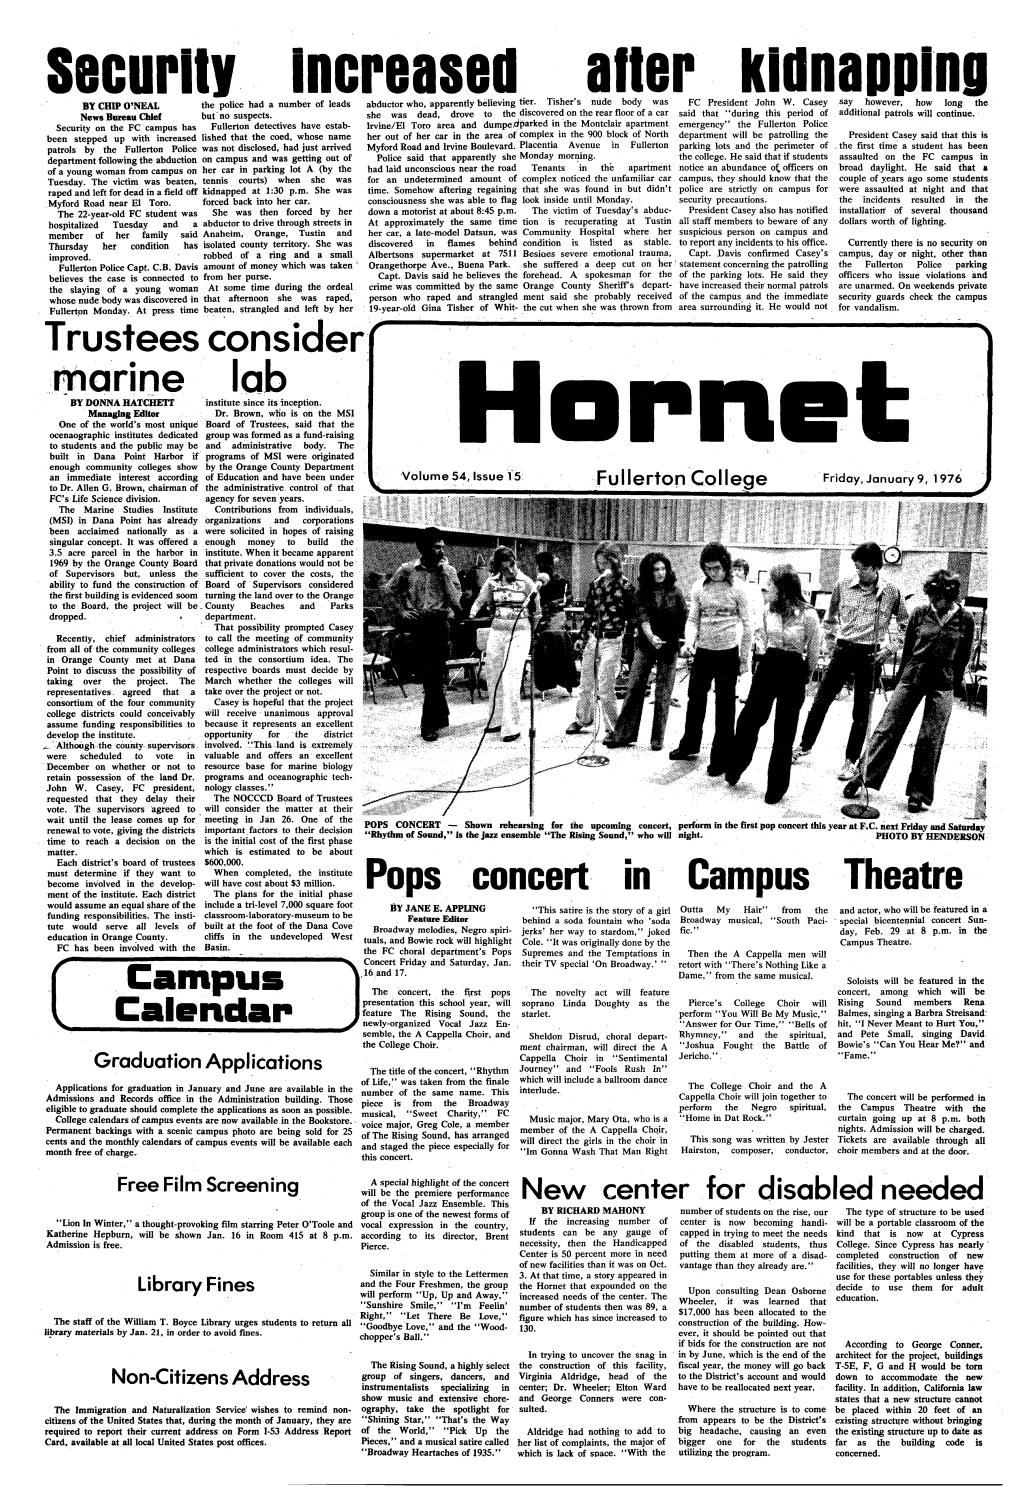 The Hornet, 1923 - 2006 - Link Page Previous Volume 54, Issue 14 Next Volume 54, Issue 16